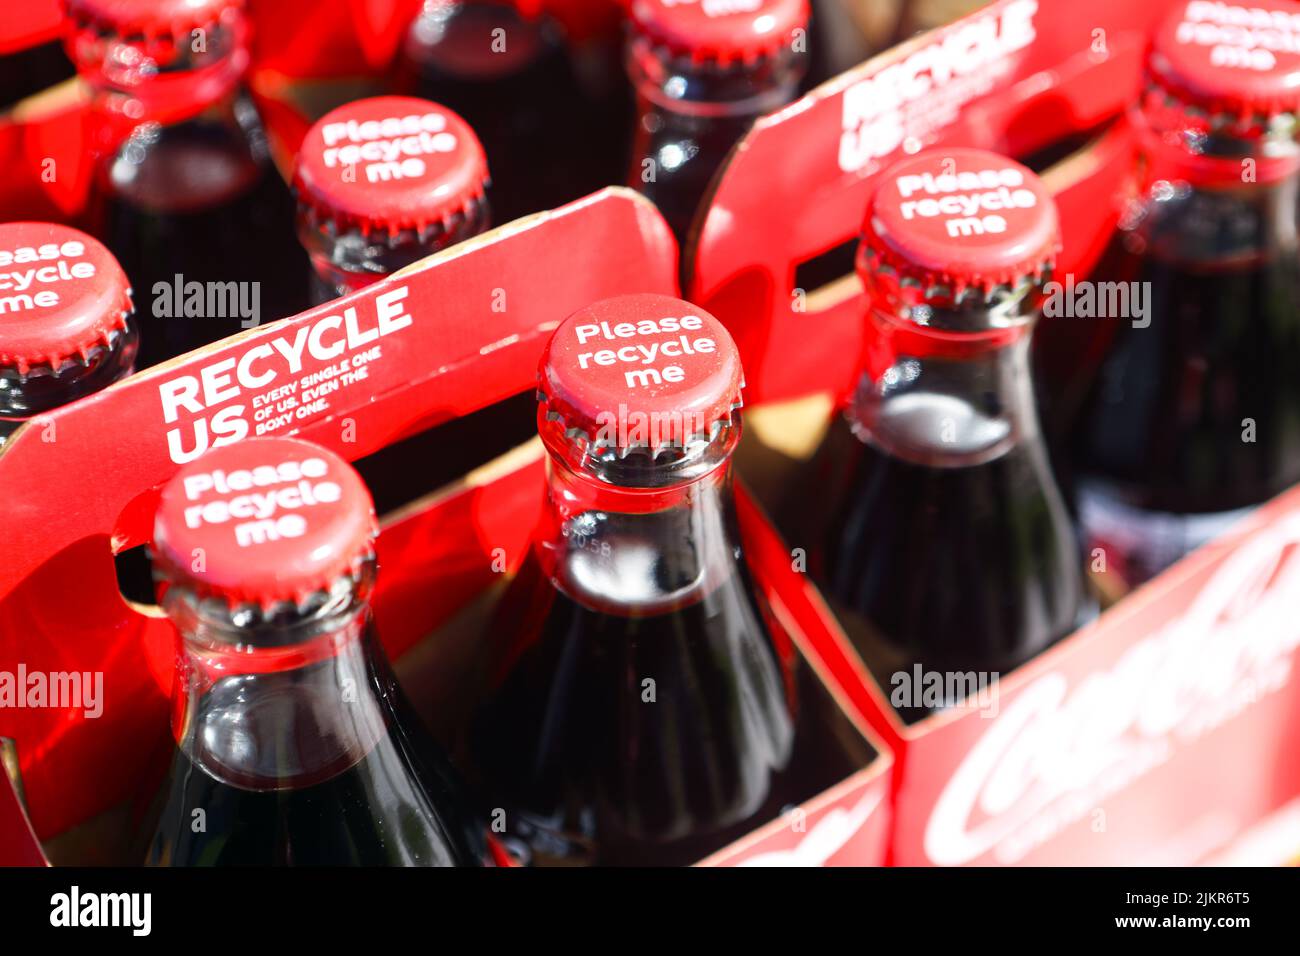 Coke bottles with Coca-Cola urging to recycle, bottles, caps and cardboard containers Stock Photo